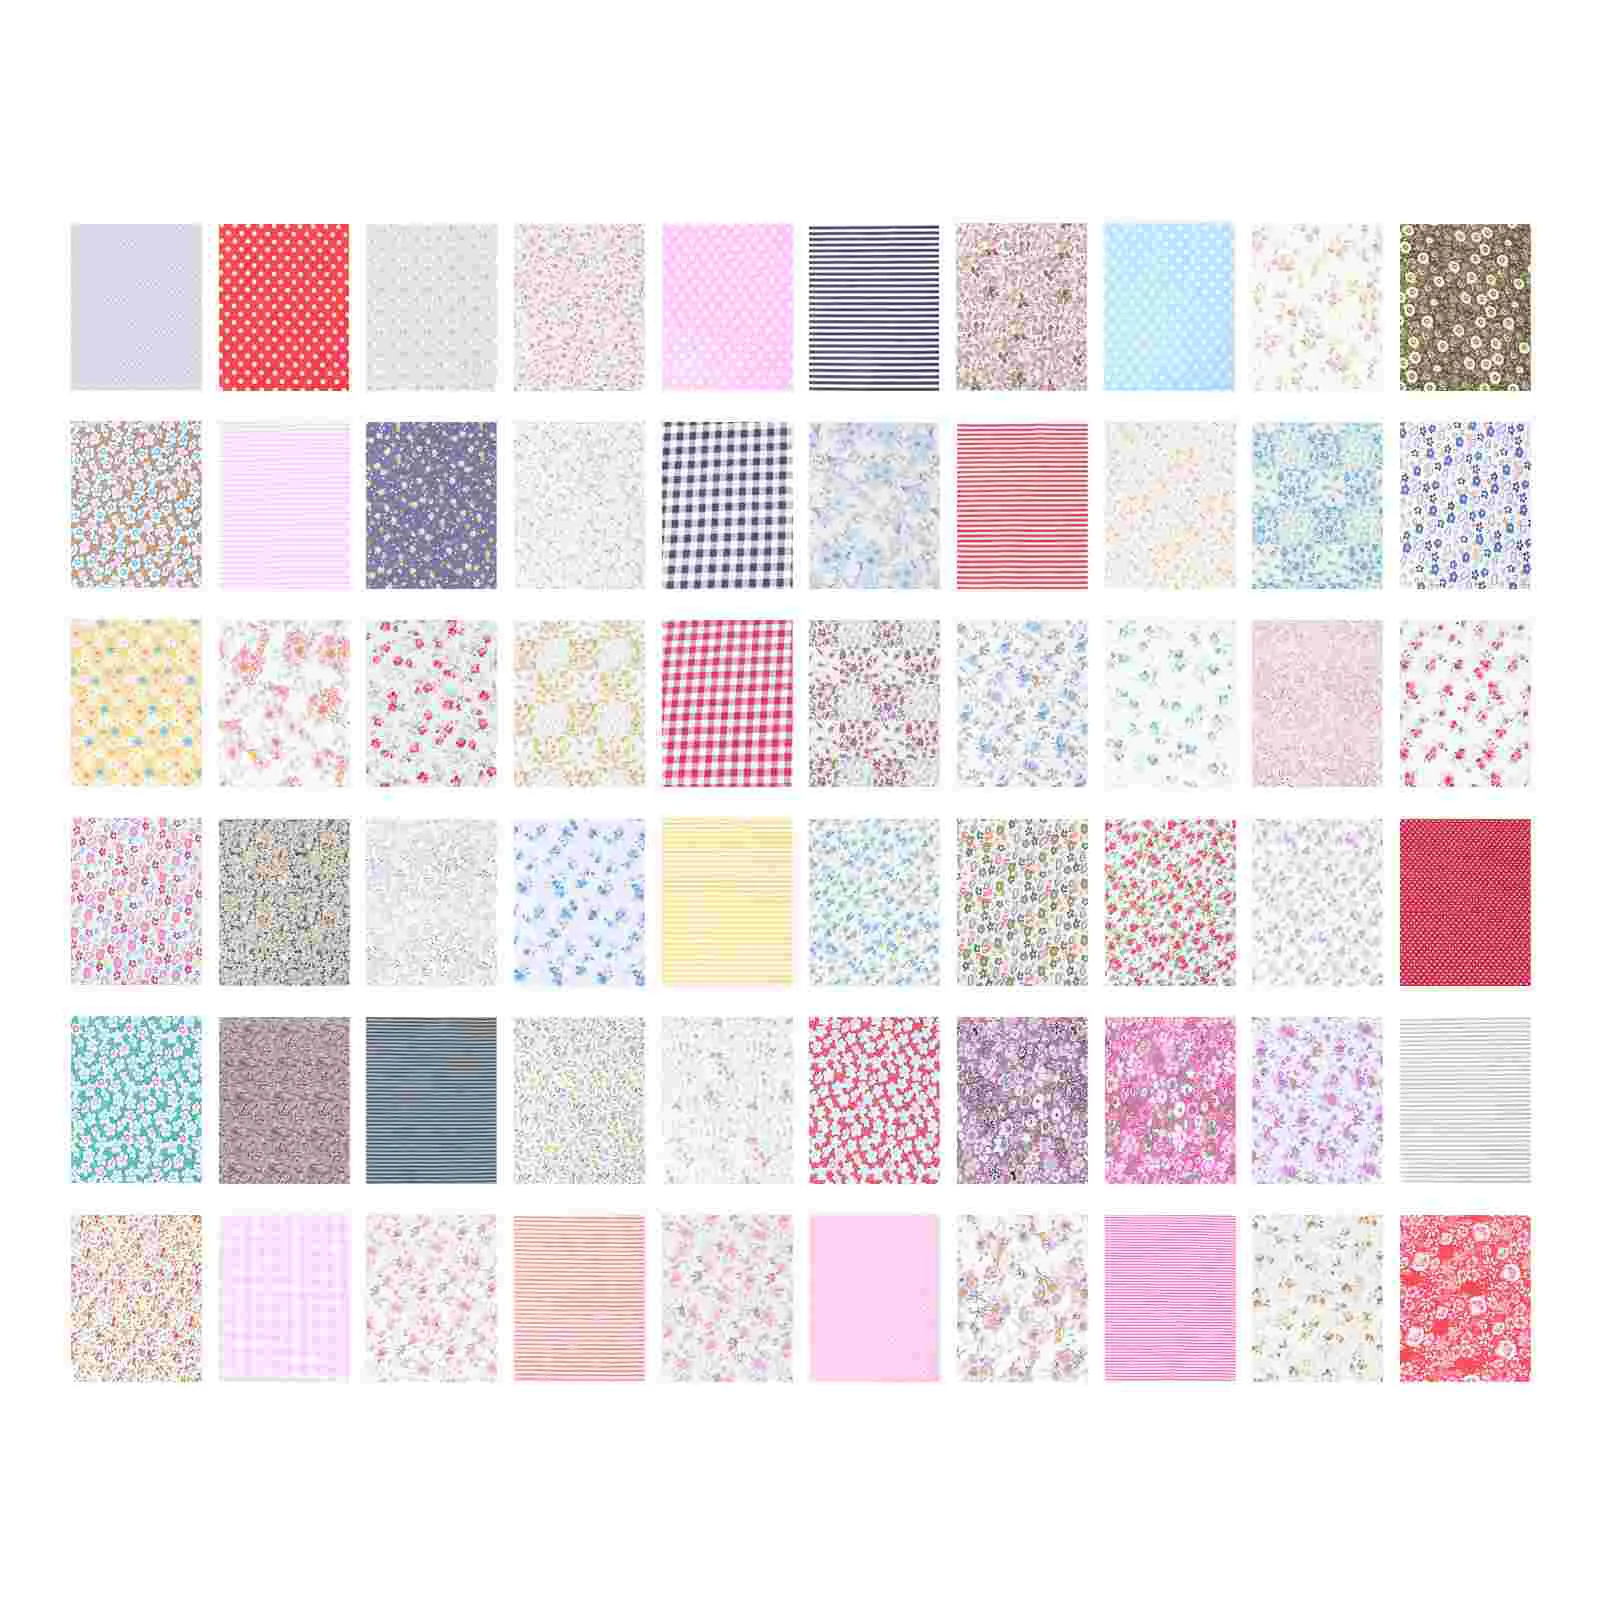 

60 25cmx20cm Squares Sheets Cotton Floral Printed Precut Fabric Sheets Cloths for Patchwork Sewing DIY Crafting Quilting Fabric